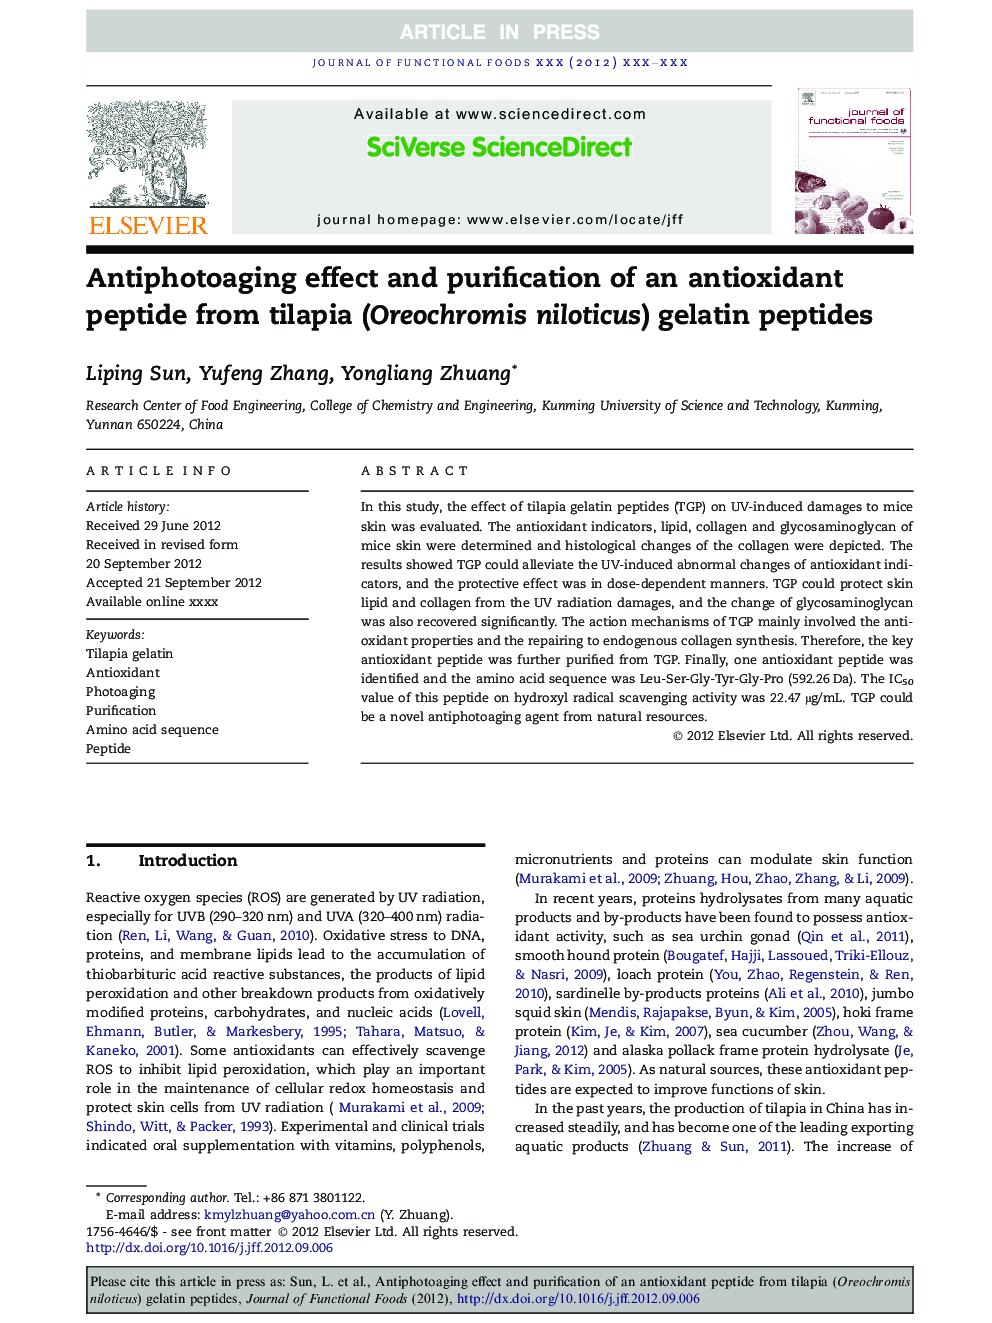 Antiphotoaging effect and purification of an antioxidant peptide from tilapia (Oreochromis niloticus) gelatin peptides